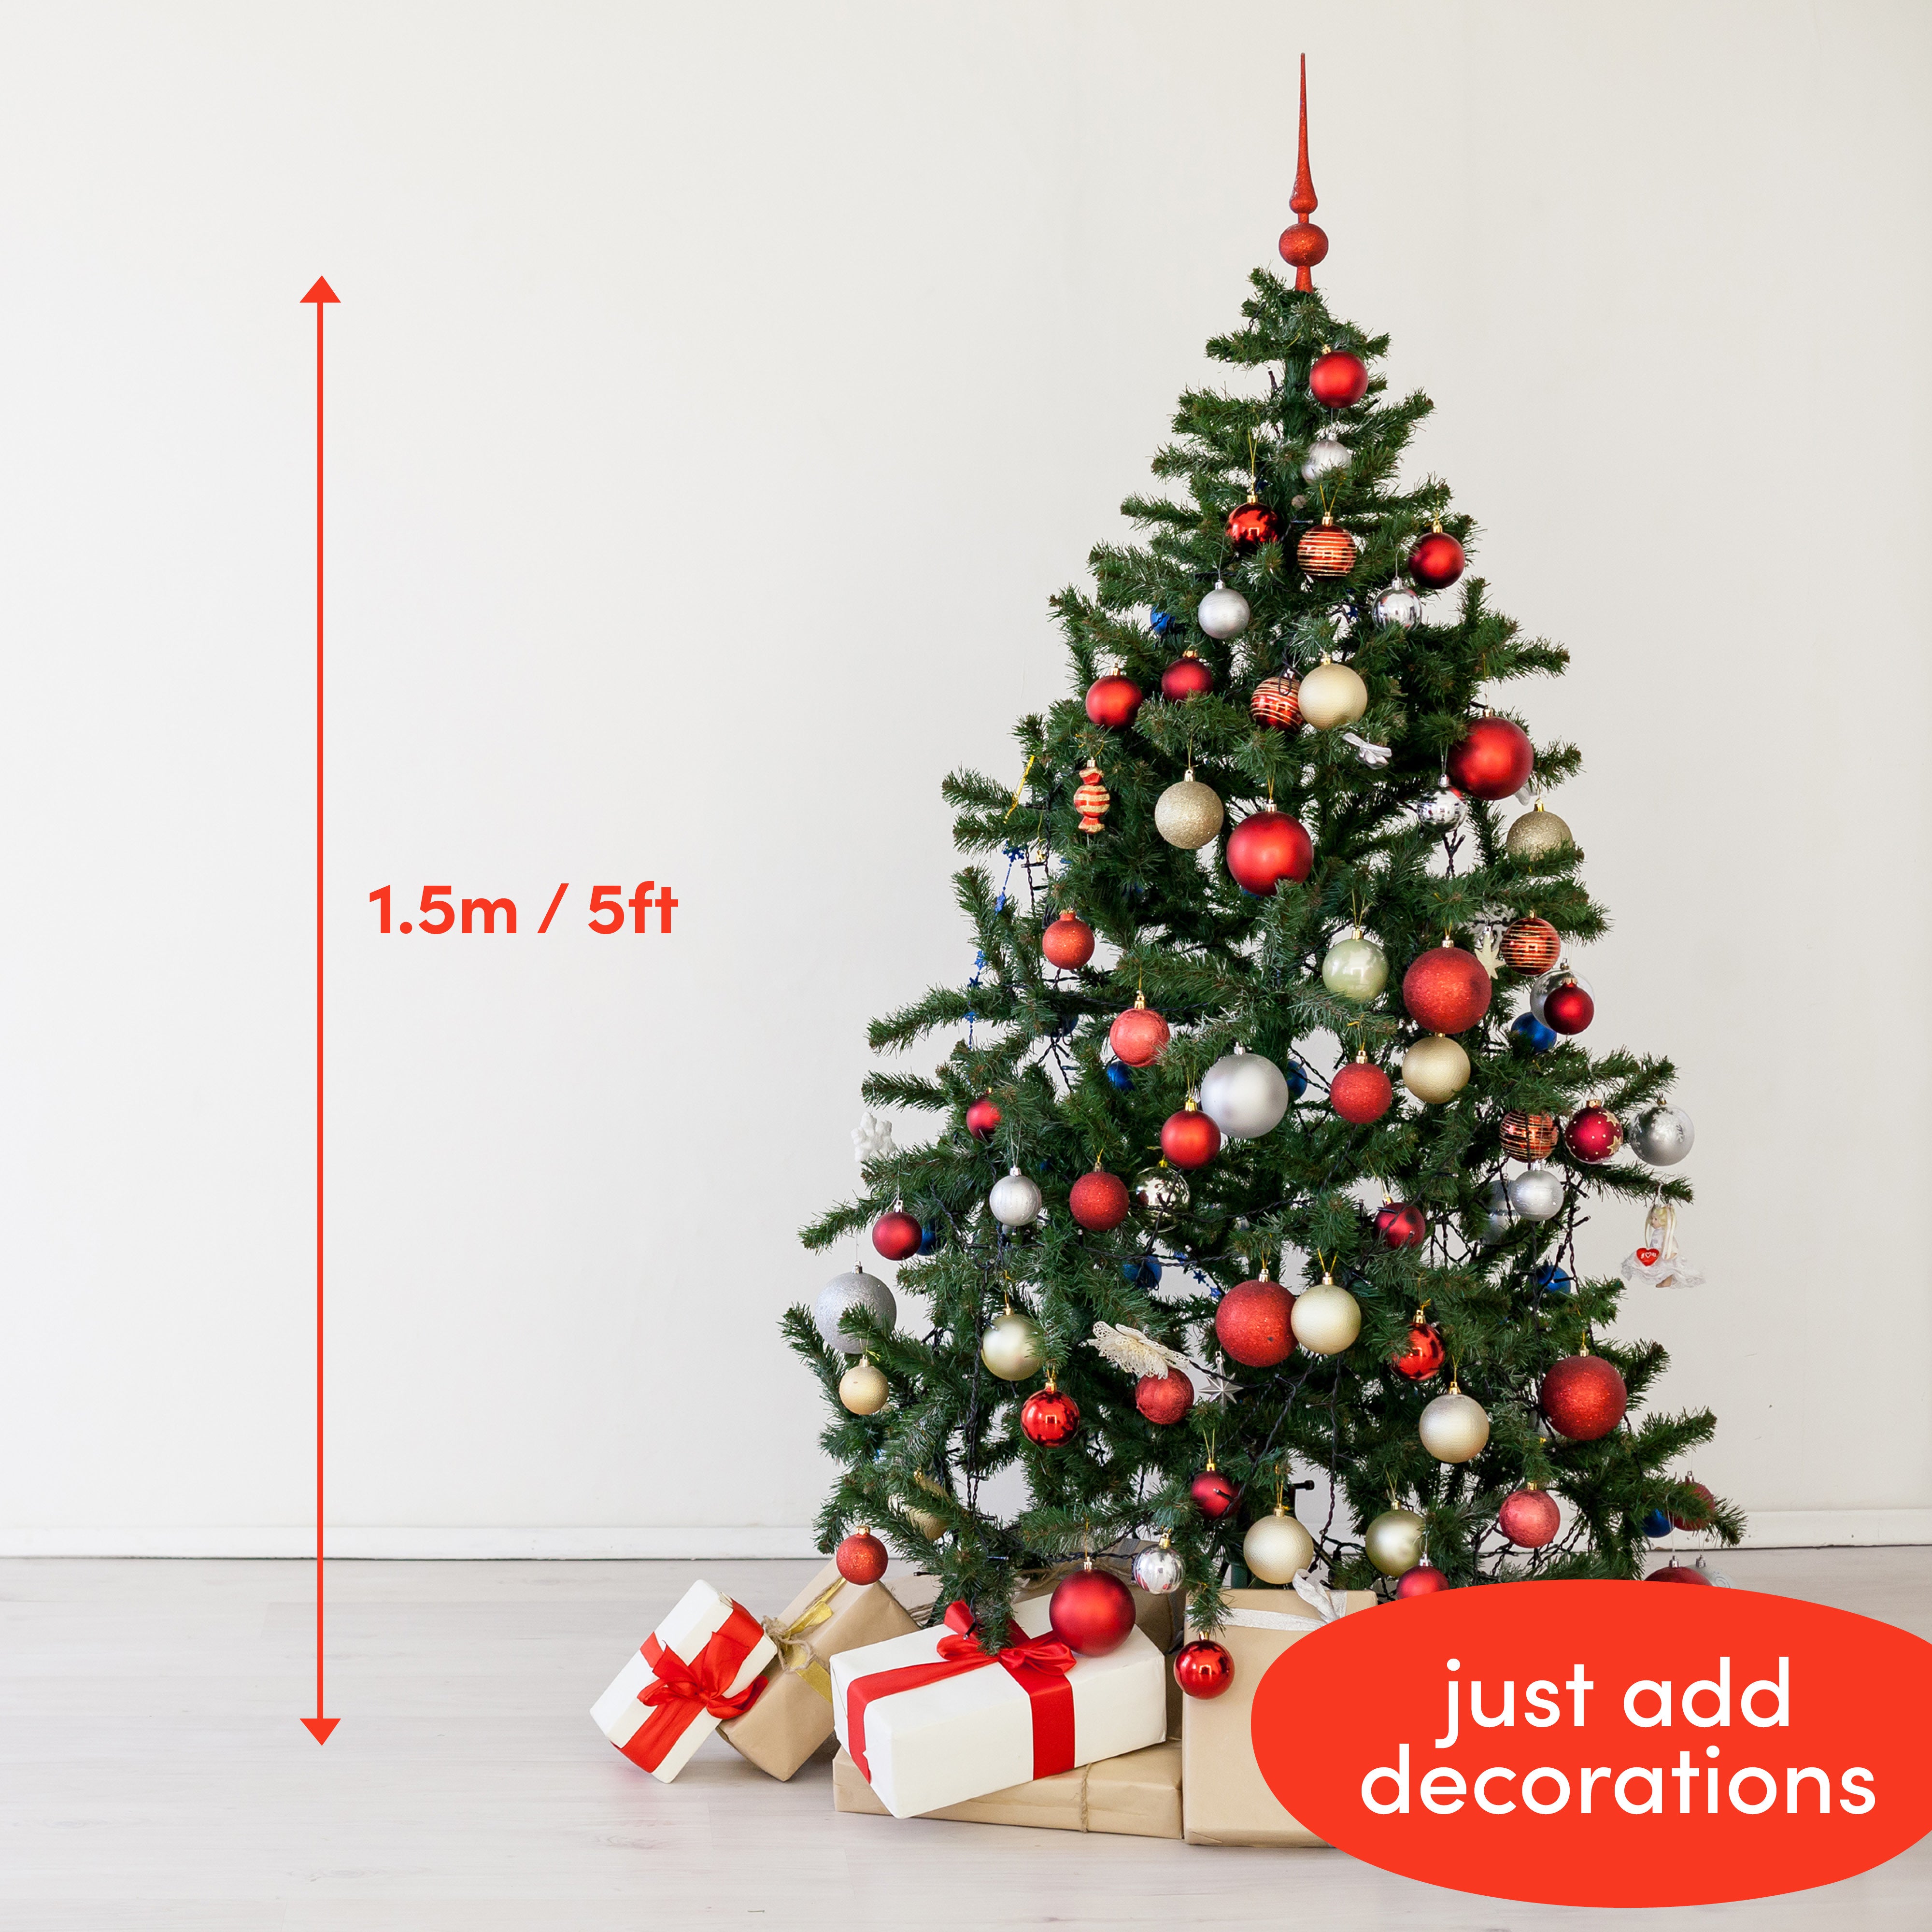 5FT Premium Artificial Christmas Tree with Metal Stand